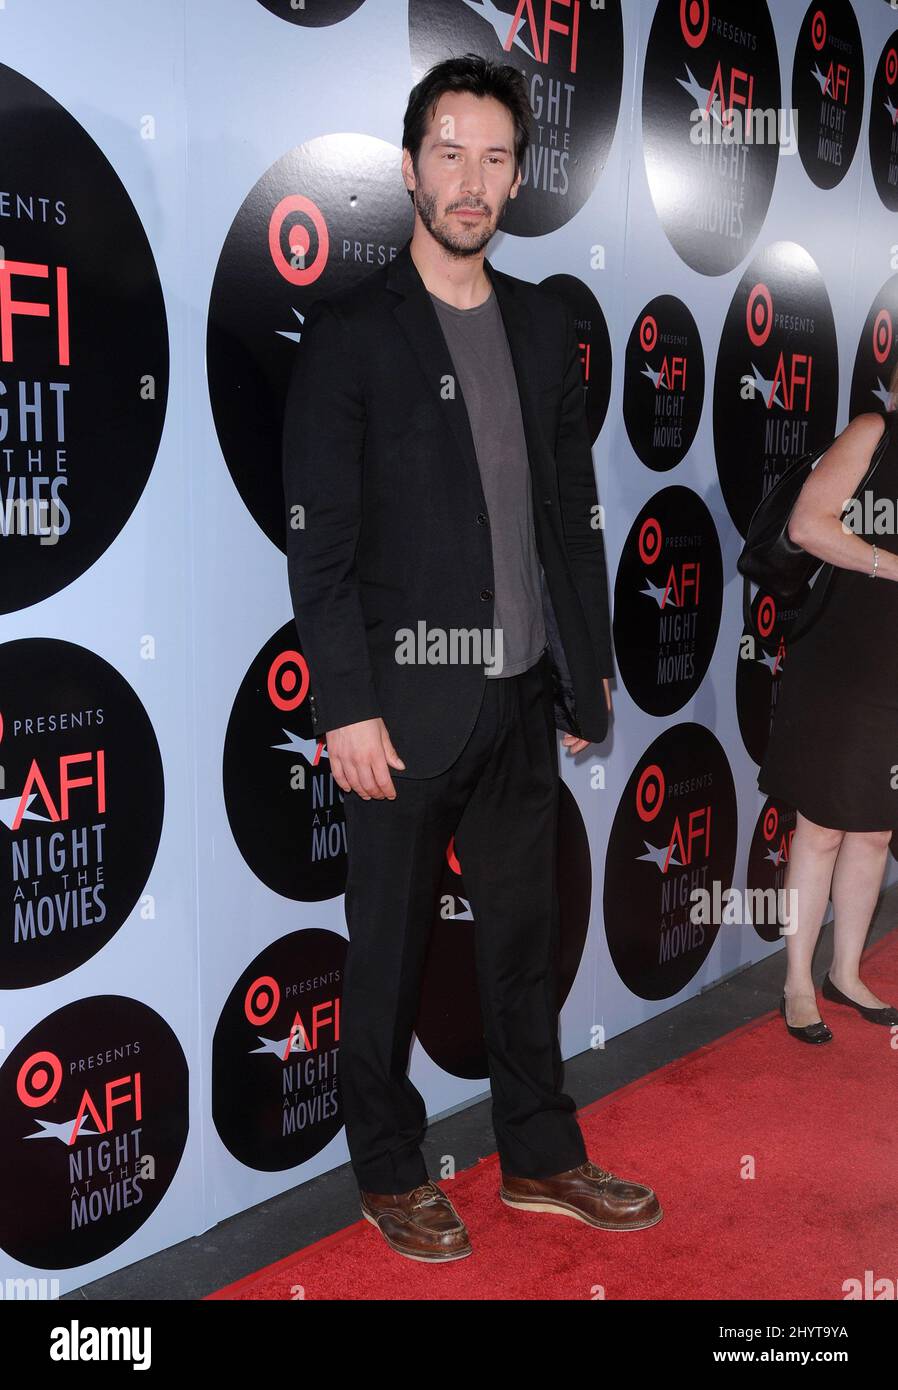 Keanu Reeves attending TARGET Presents AFI Night at the Movies, Los Angeles. Stock Photo